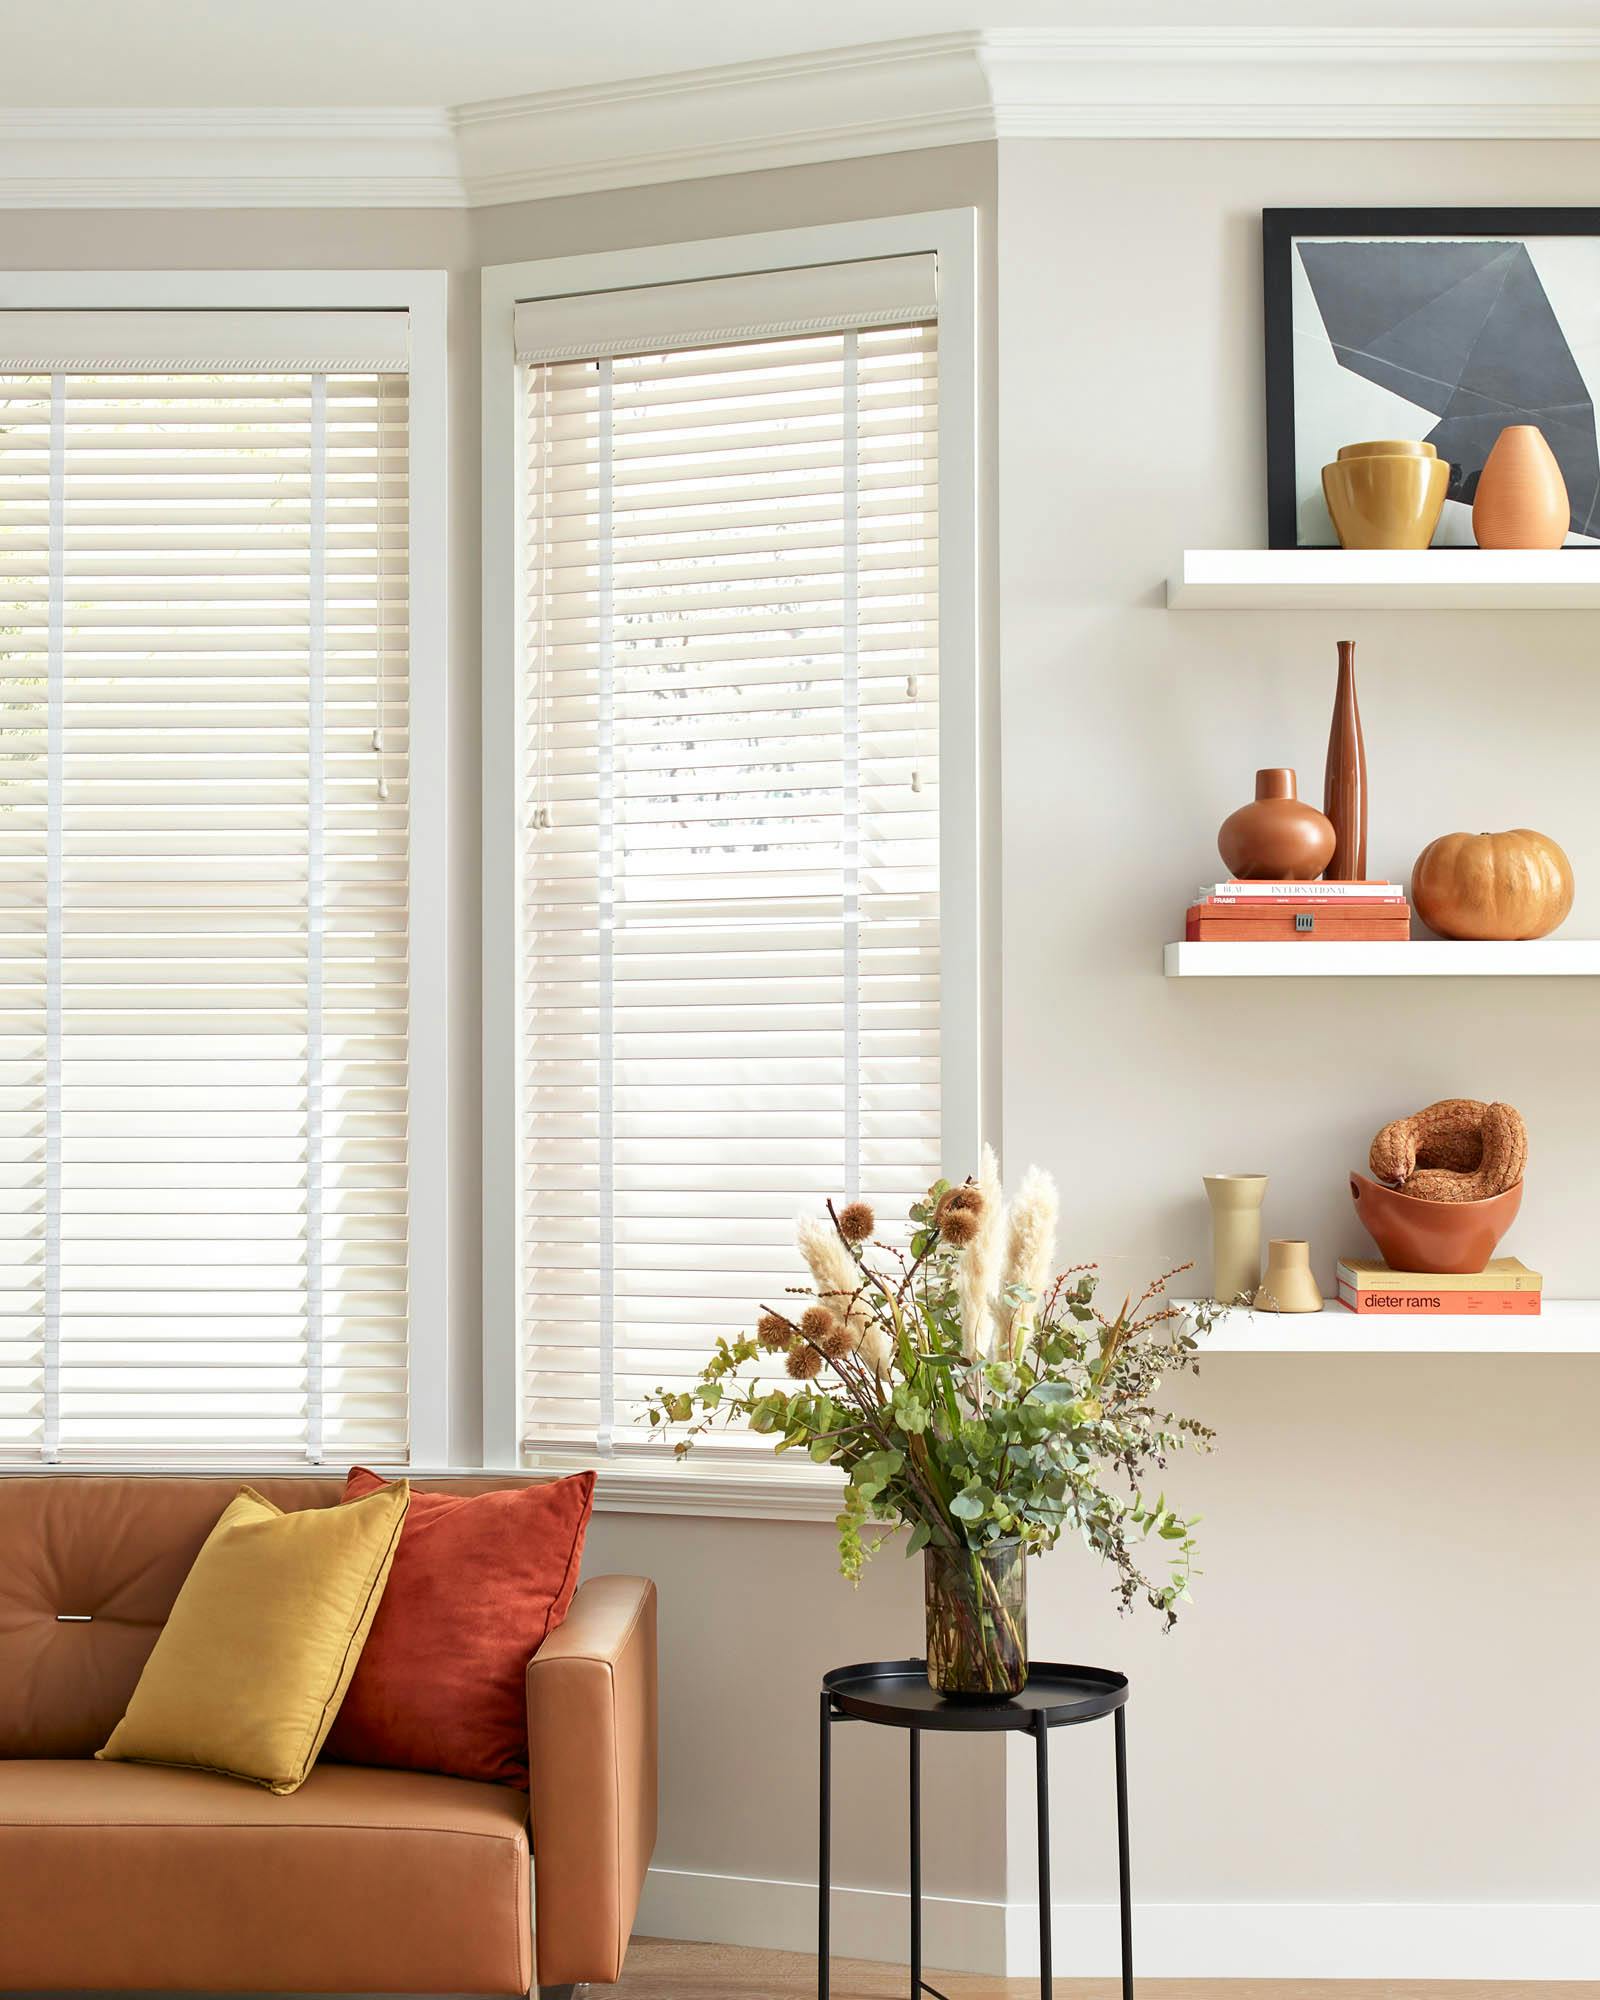 Blinds vs. Shades: How to Make the Right Choice for Your Home